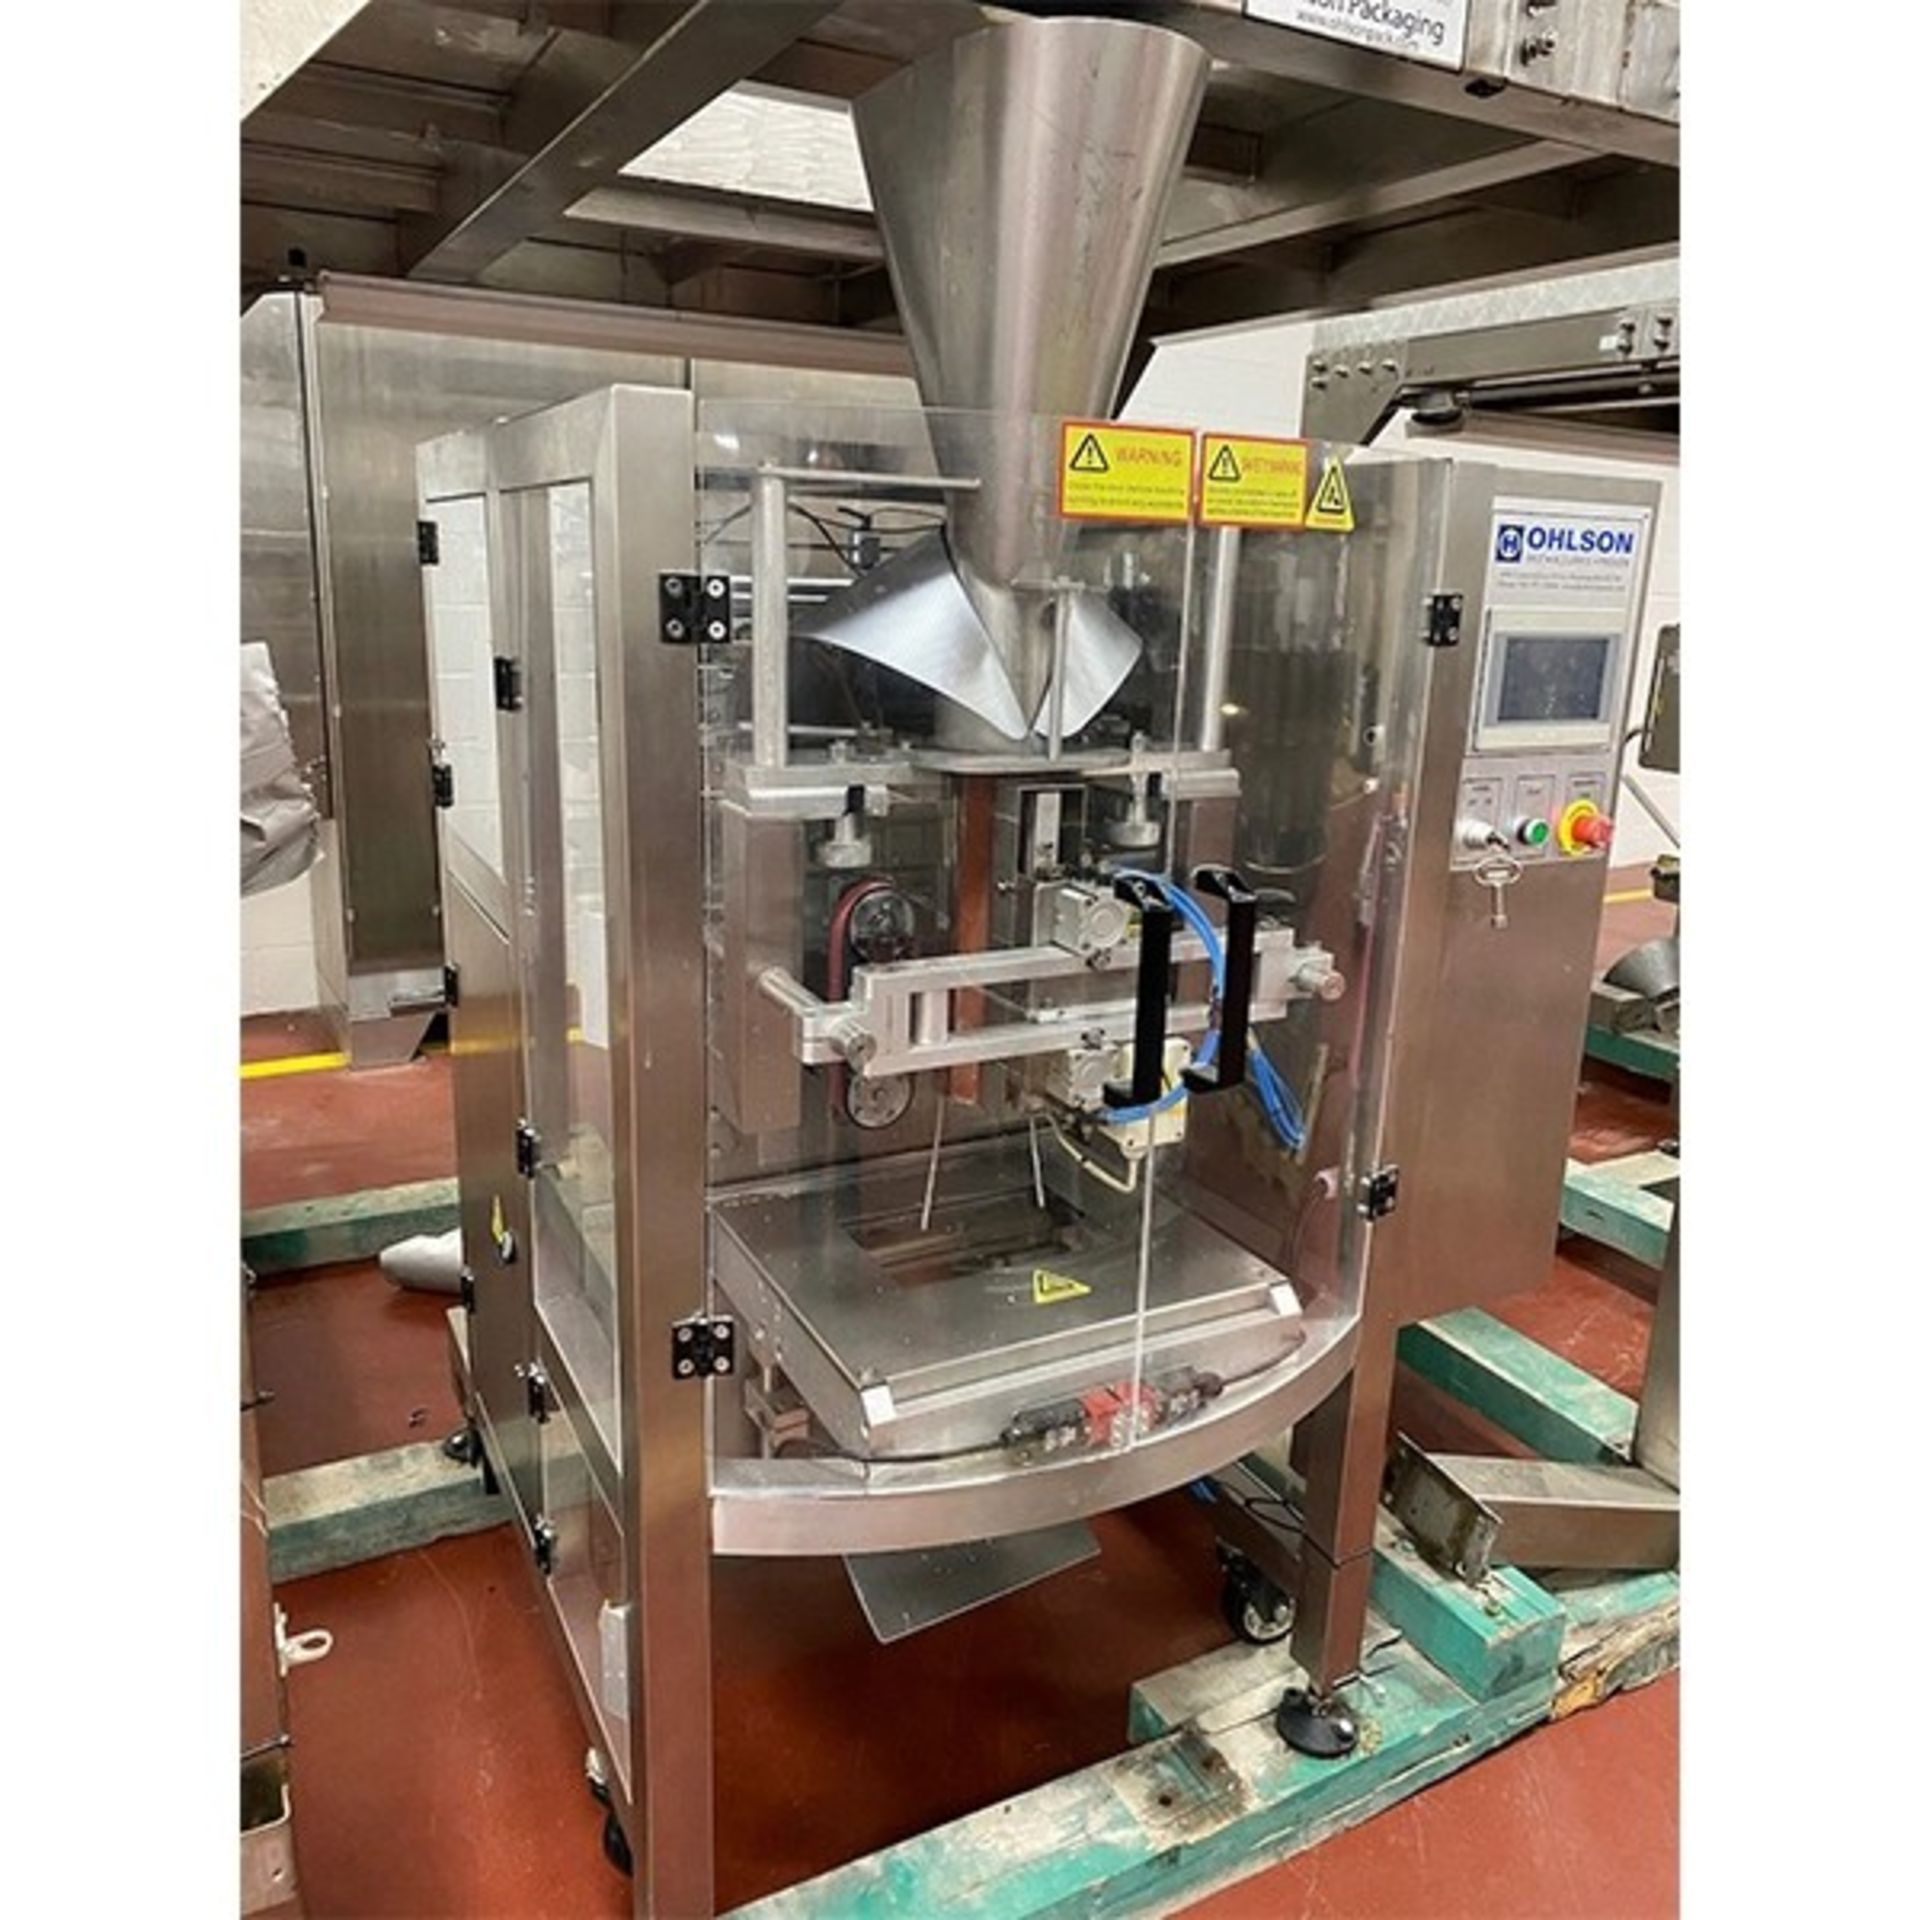 2018/2019 Ohlson Continuous Weighing and Vertical Form, Fill and Seal System includes - Image 9 of 13